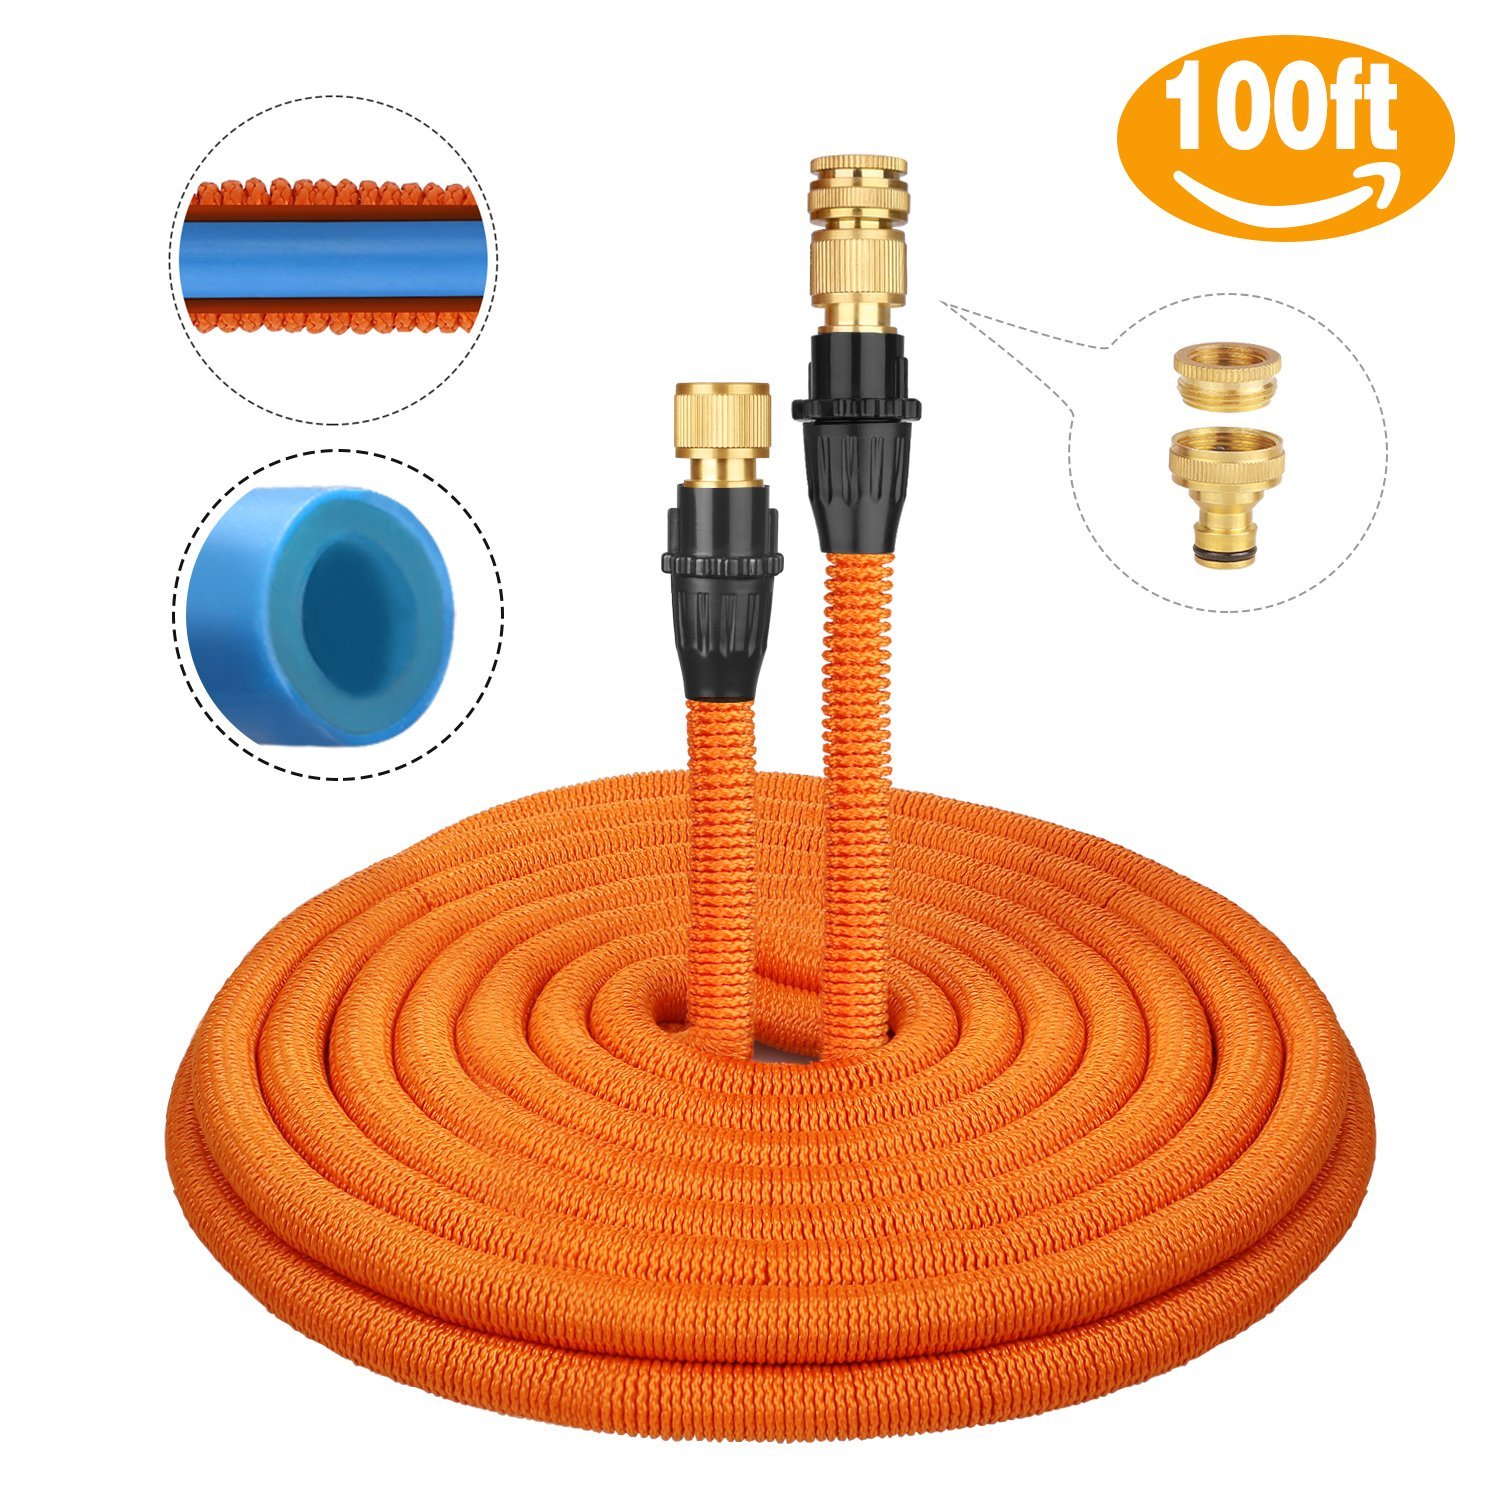 TACKLIFE Garden Hose, [Fathers Day Gifts] 100FT Hose Pipe, 3 Times ...